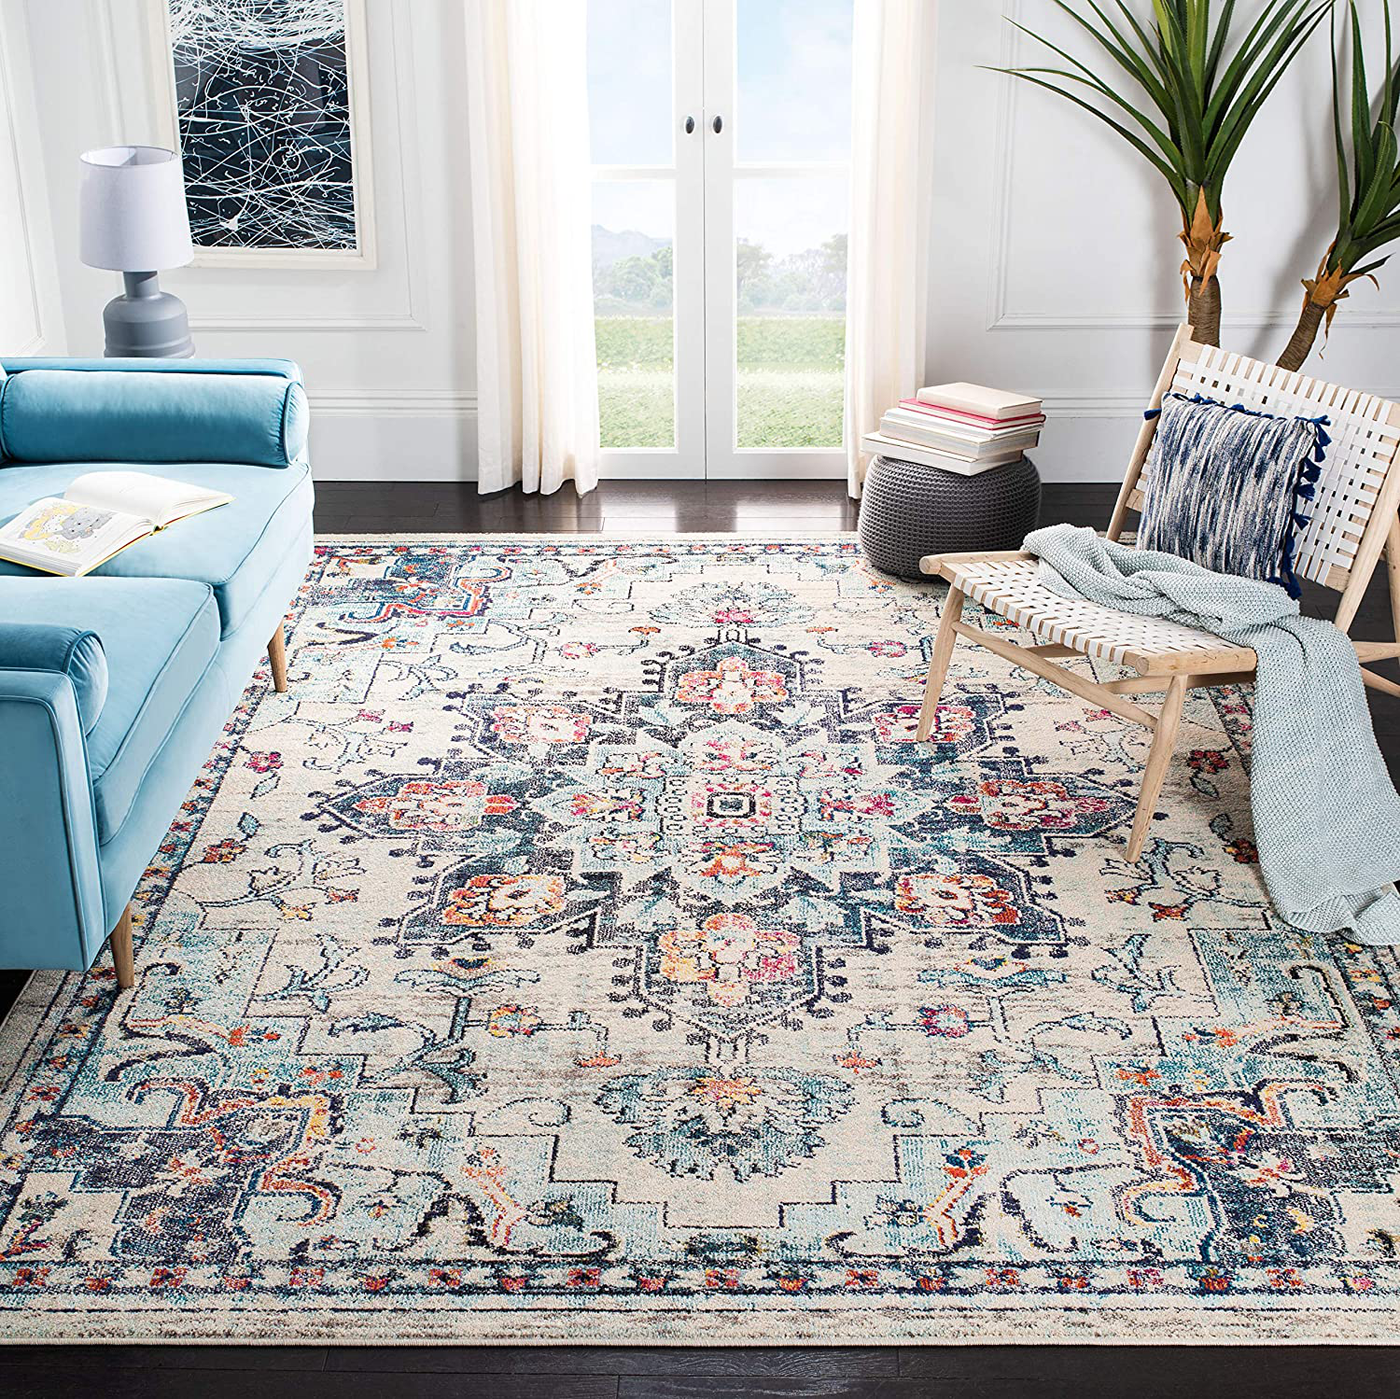 Safavieh Madison Collection MAD473B Boho Chic Medallion Distressed Non-Shedding Stain Resistant Living Room Bedroom Runner, 2'2" x 10' , Cream / Blue